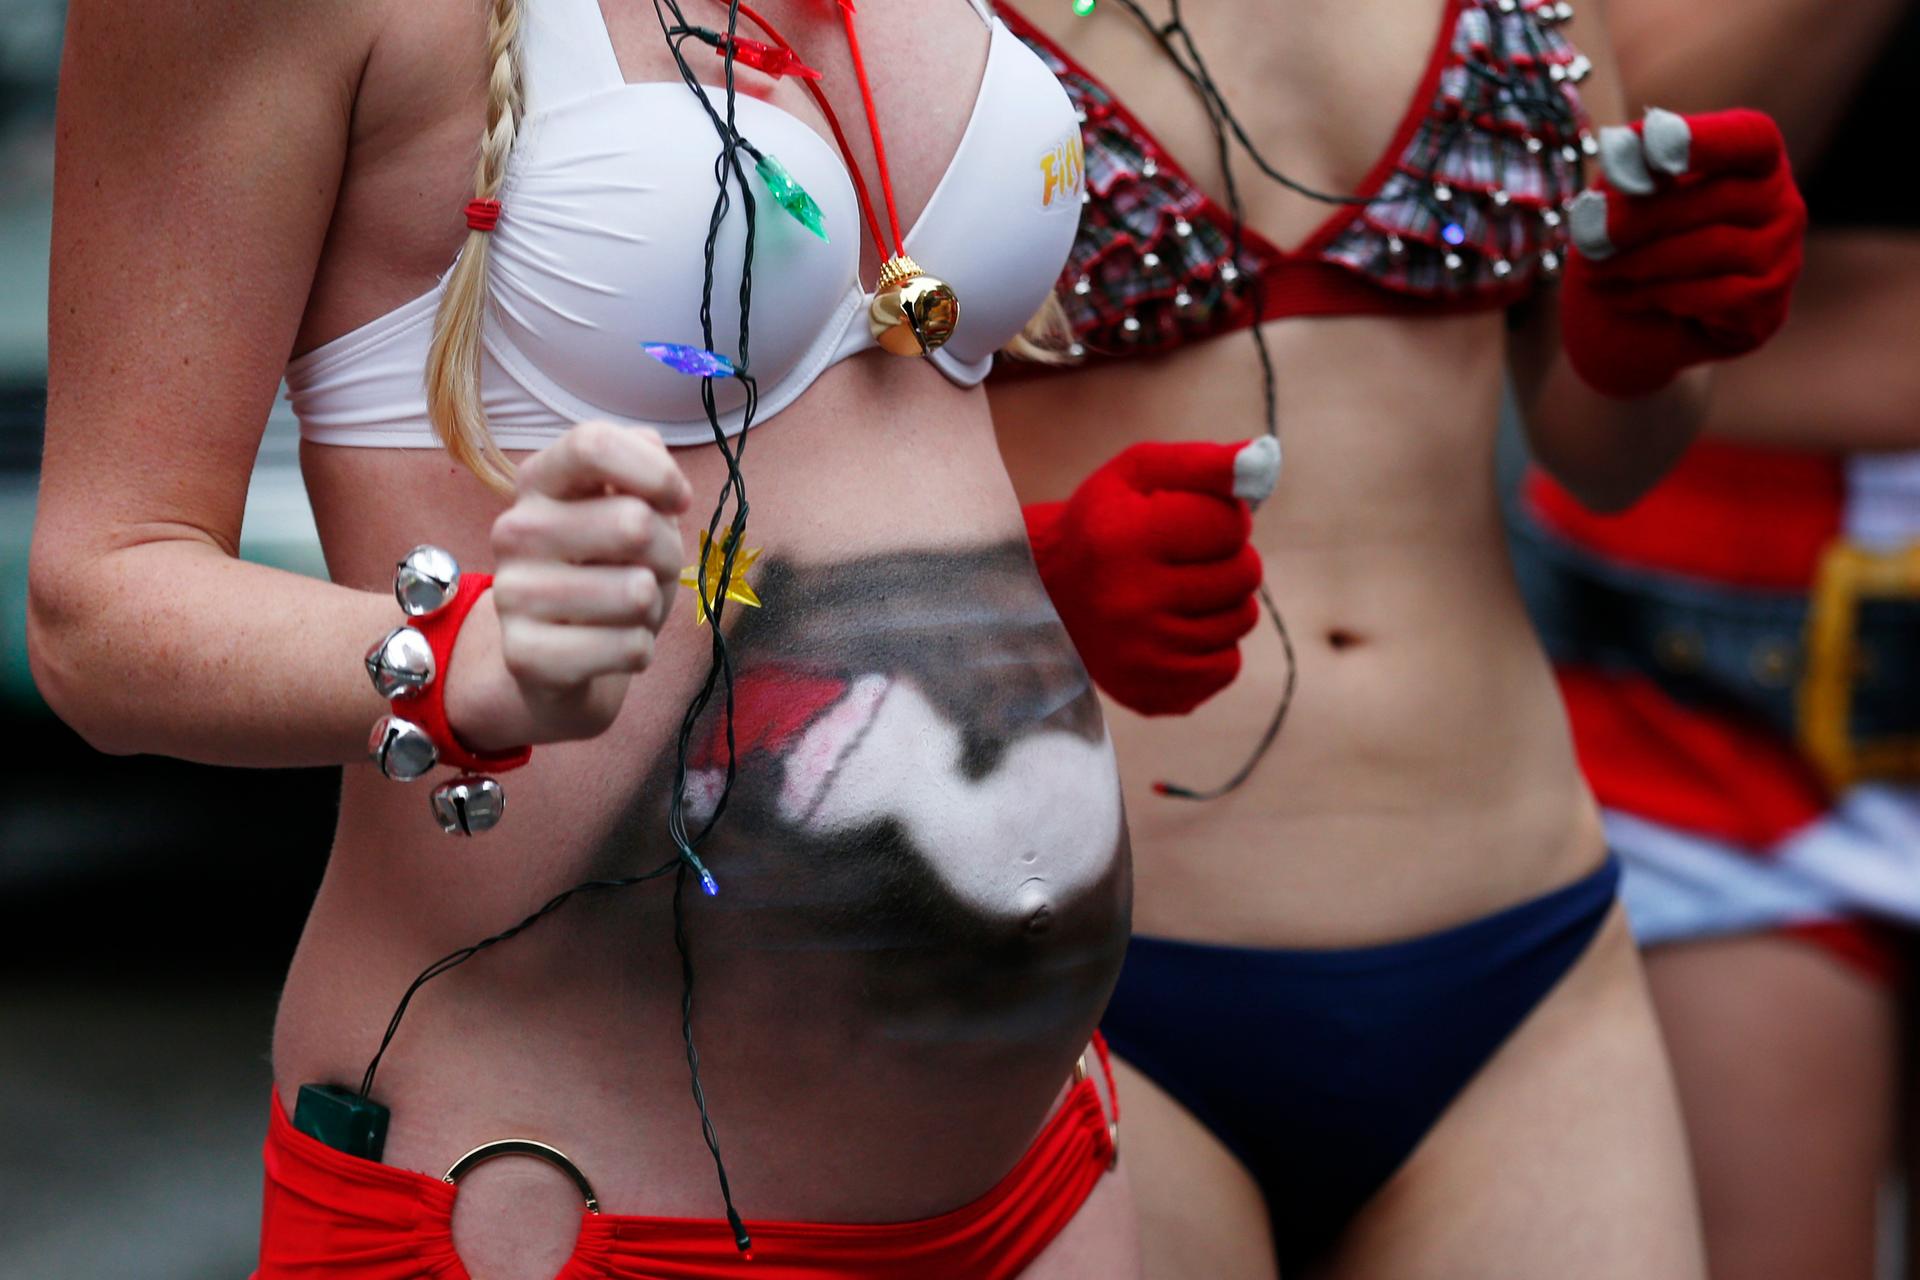 A pregnant woman with a painted stomach participates in the 15th annual Santa Speedo Run through the streets of the Back Bay in Boston.